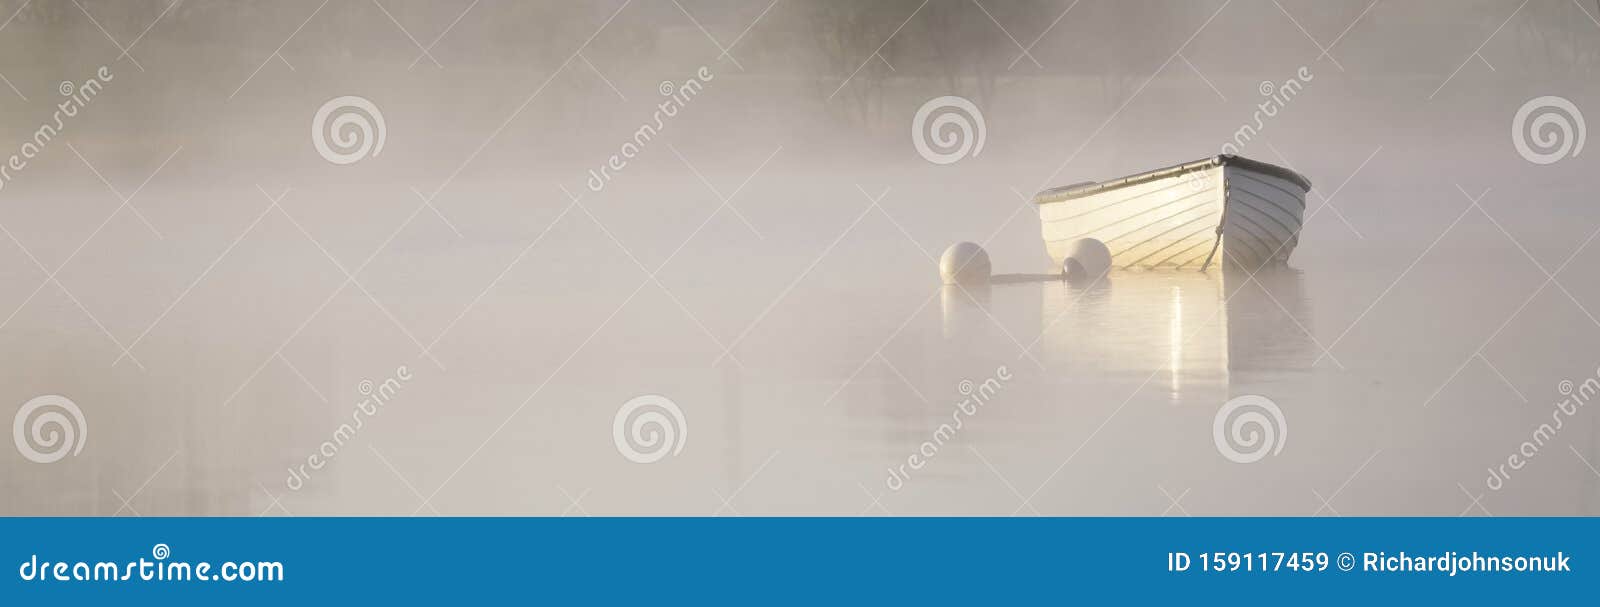 dreamy boat scene banner in fog and golden sun for tranquility calm peace and mindfulness yoga